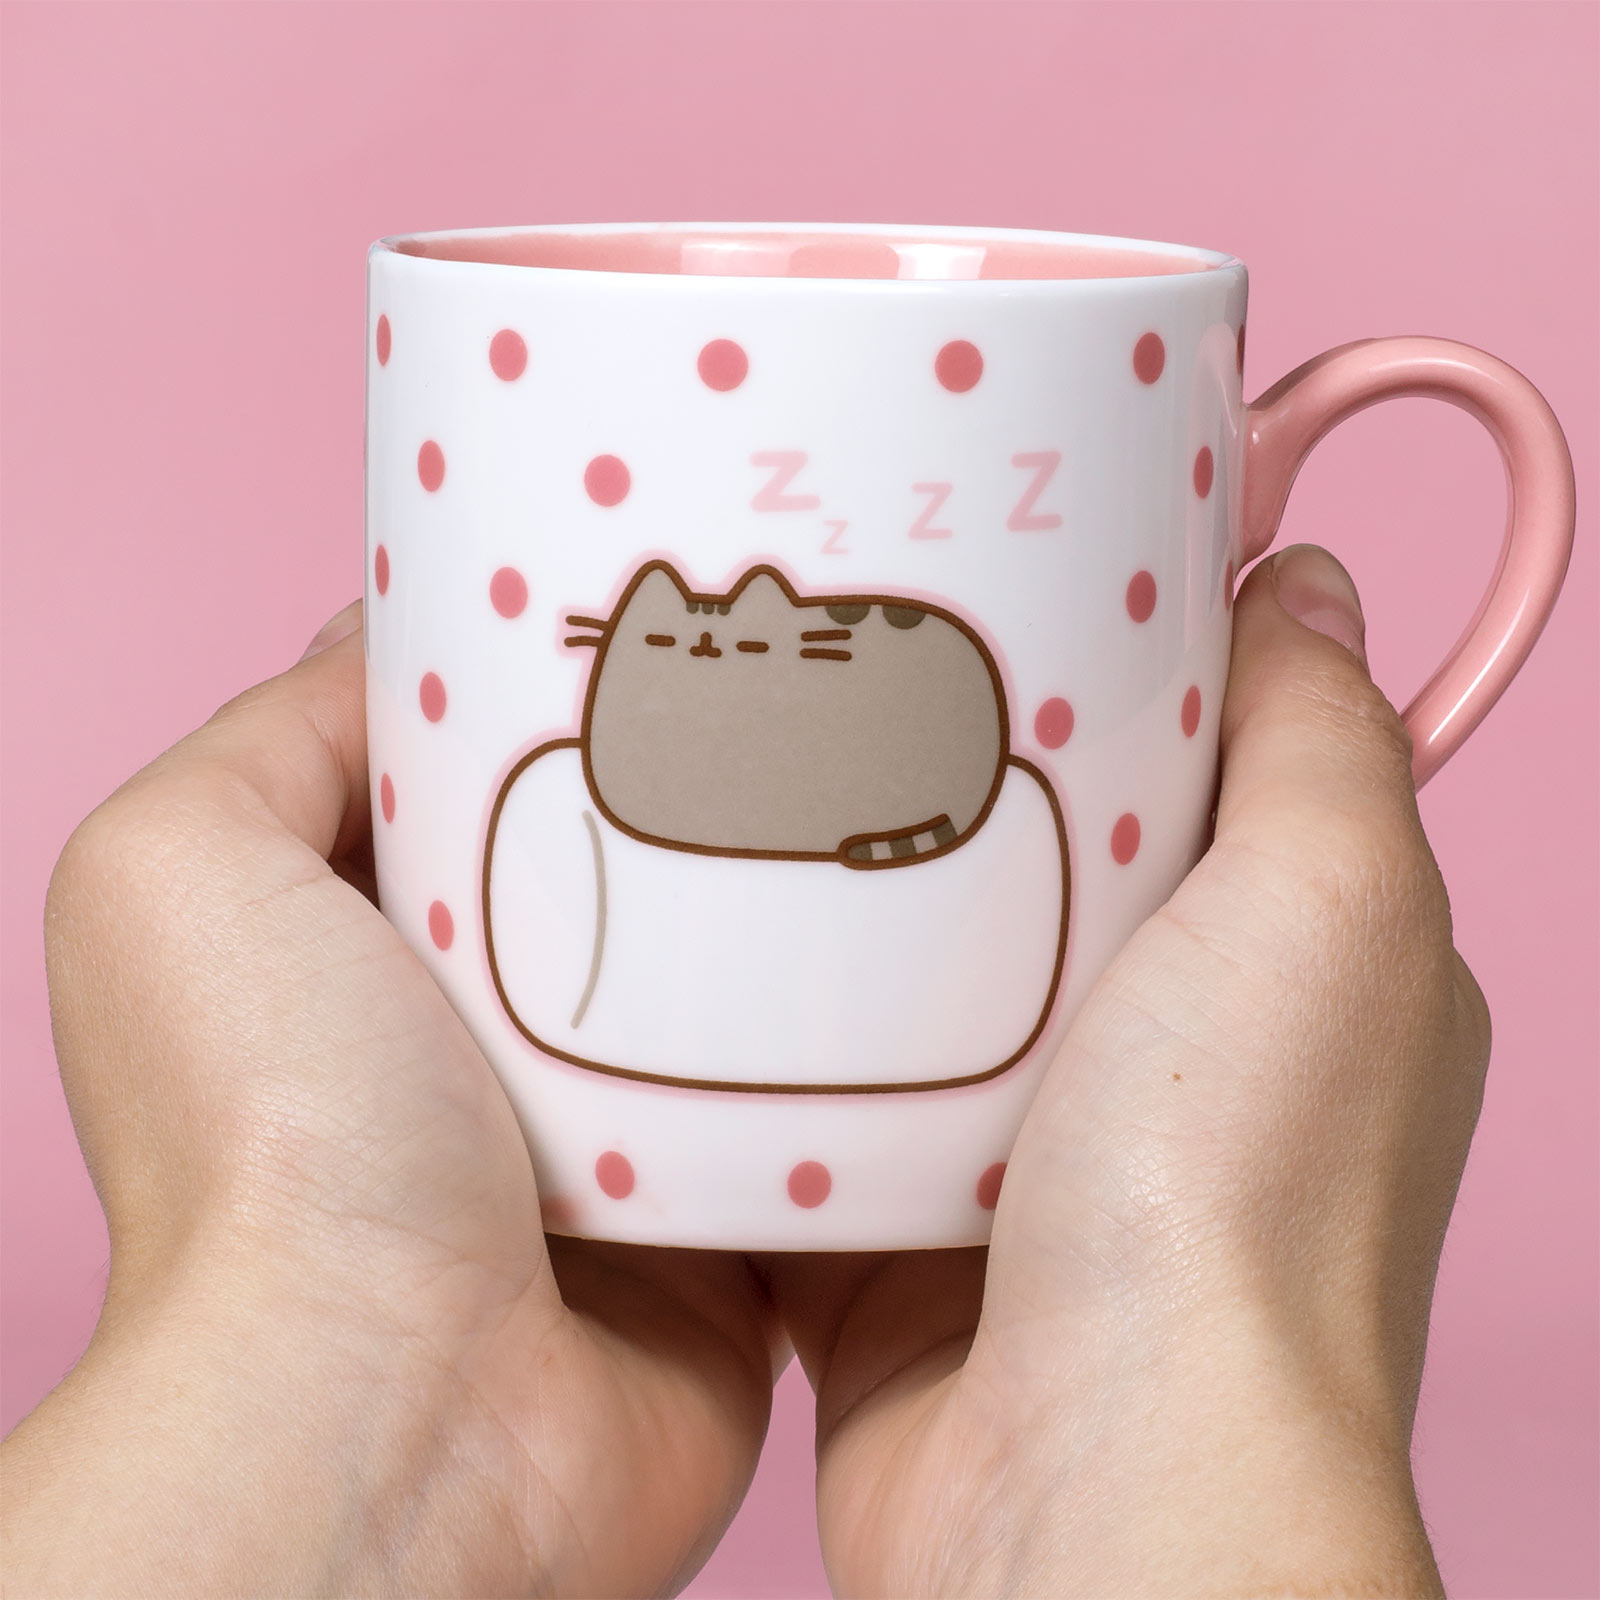 Pusheen - Marshmallow Socks and Cup